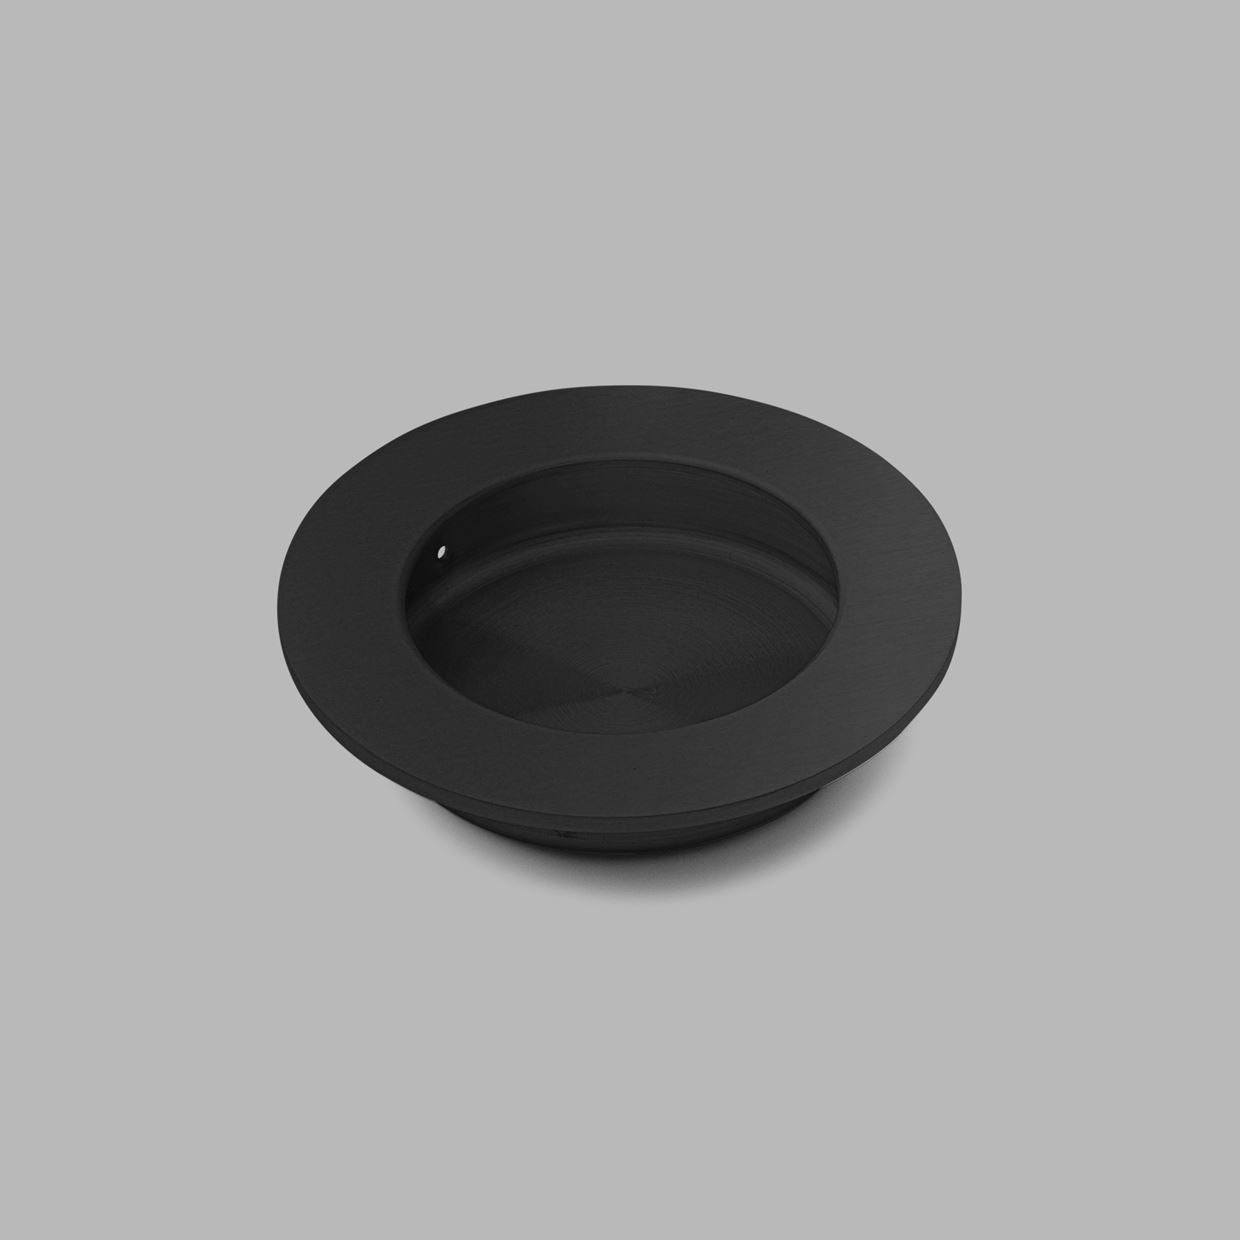 A black Knud Round Flush Pull from d line on a gray background.